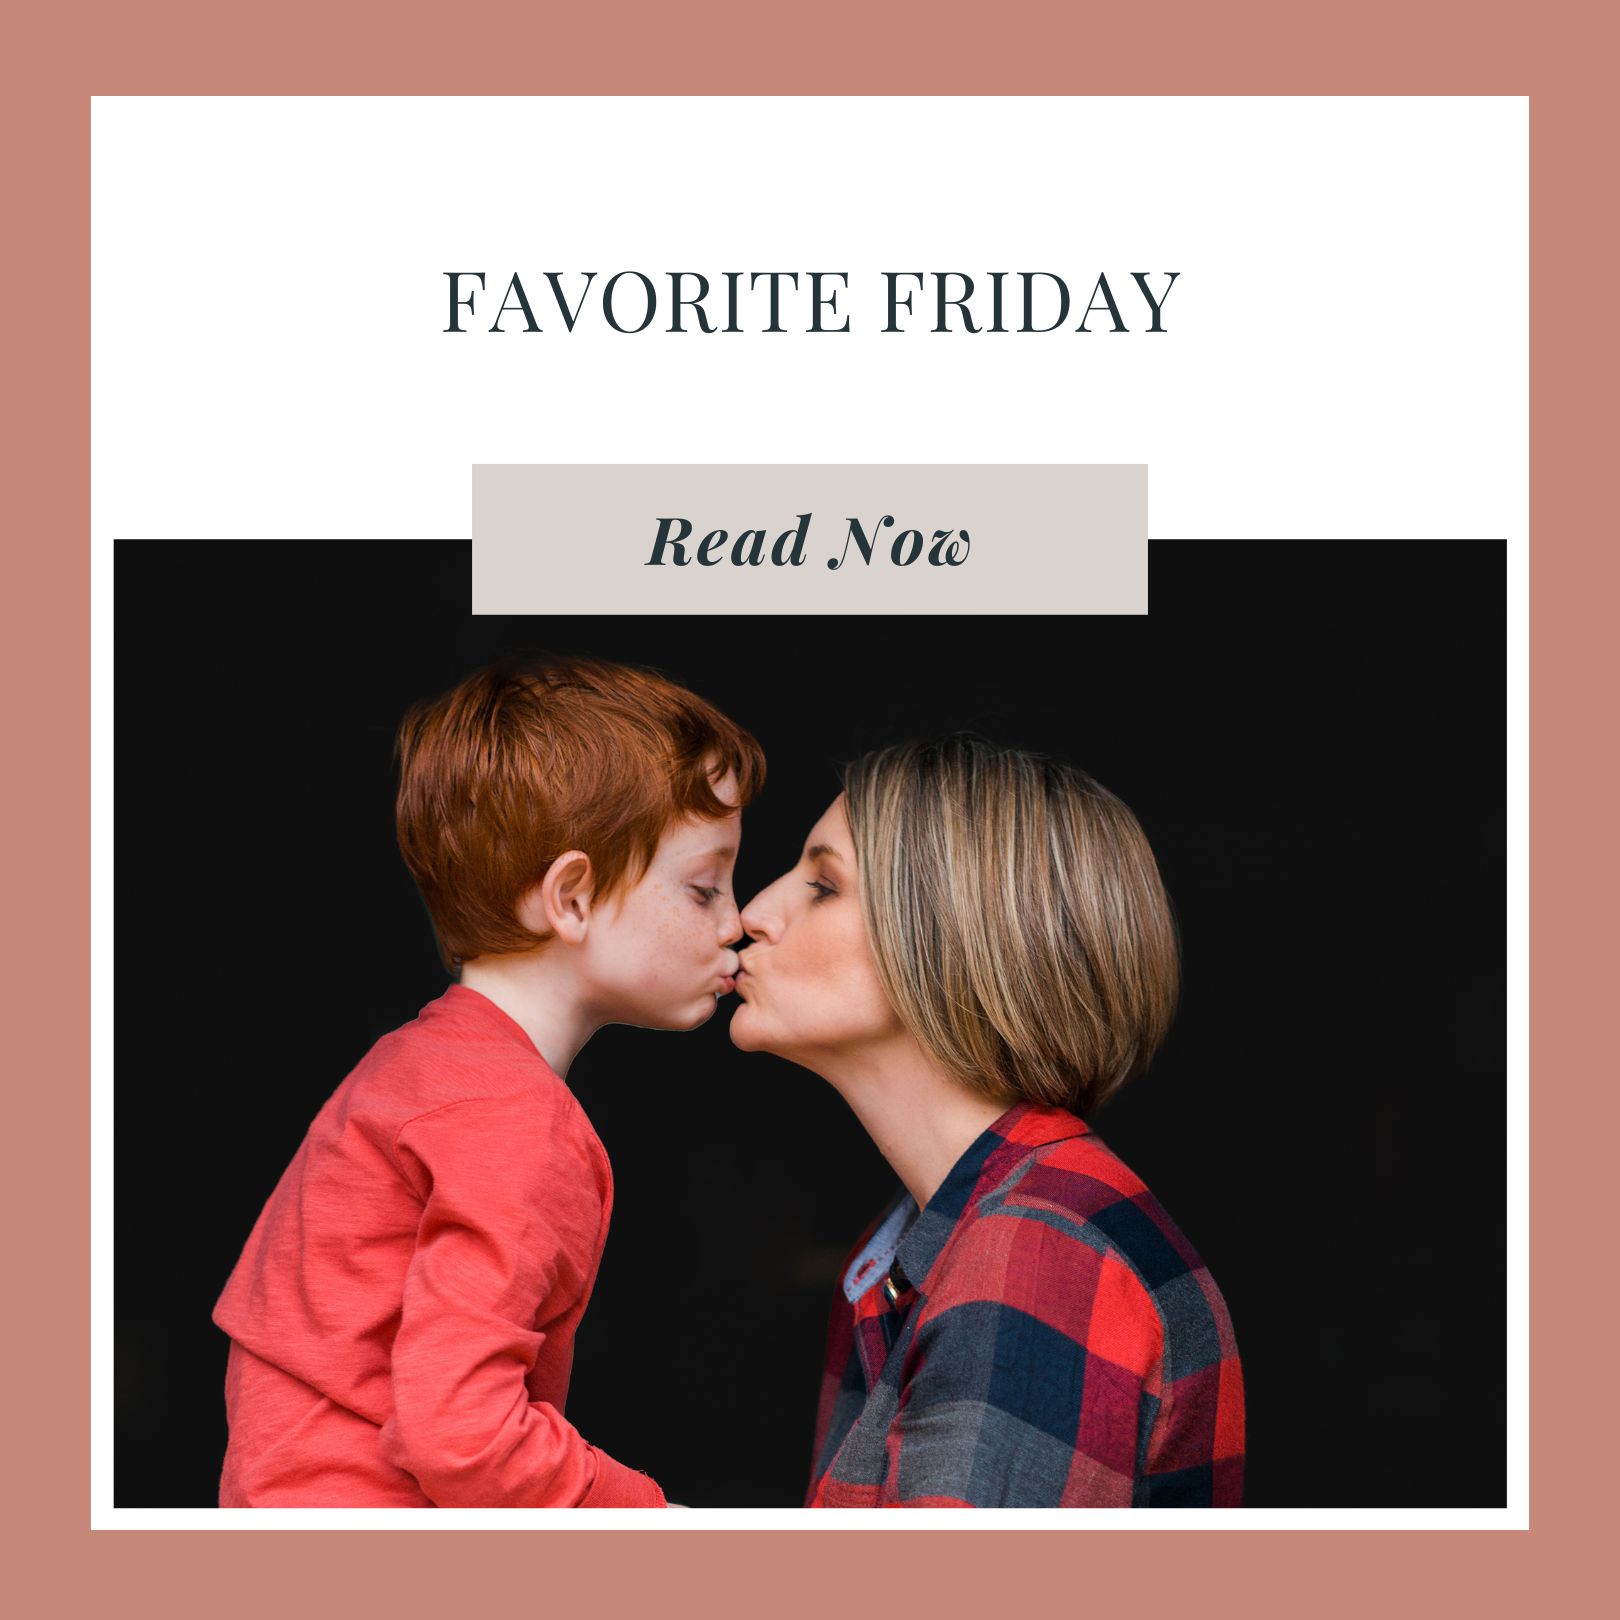 Mommy and her little guy favorite friday